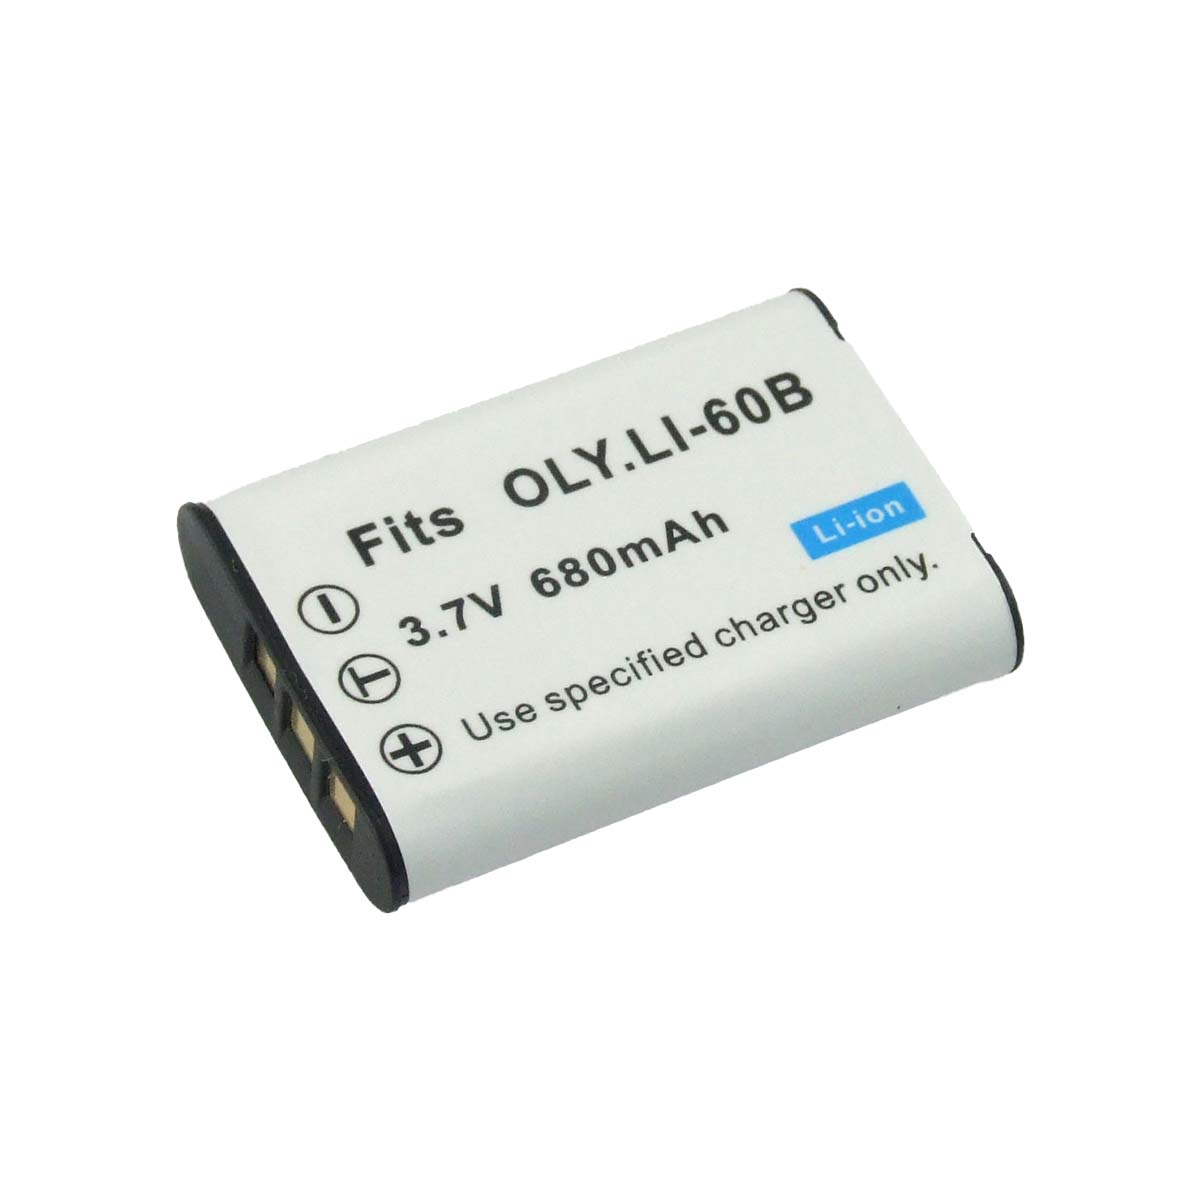 New In stock for sale, SANYO Battery DB-L70